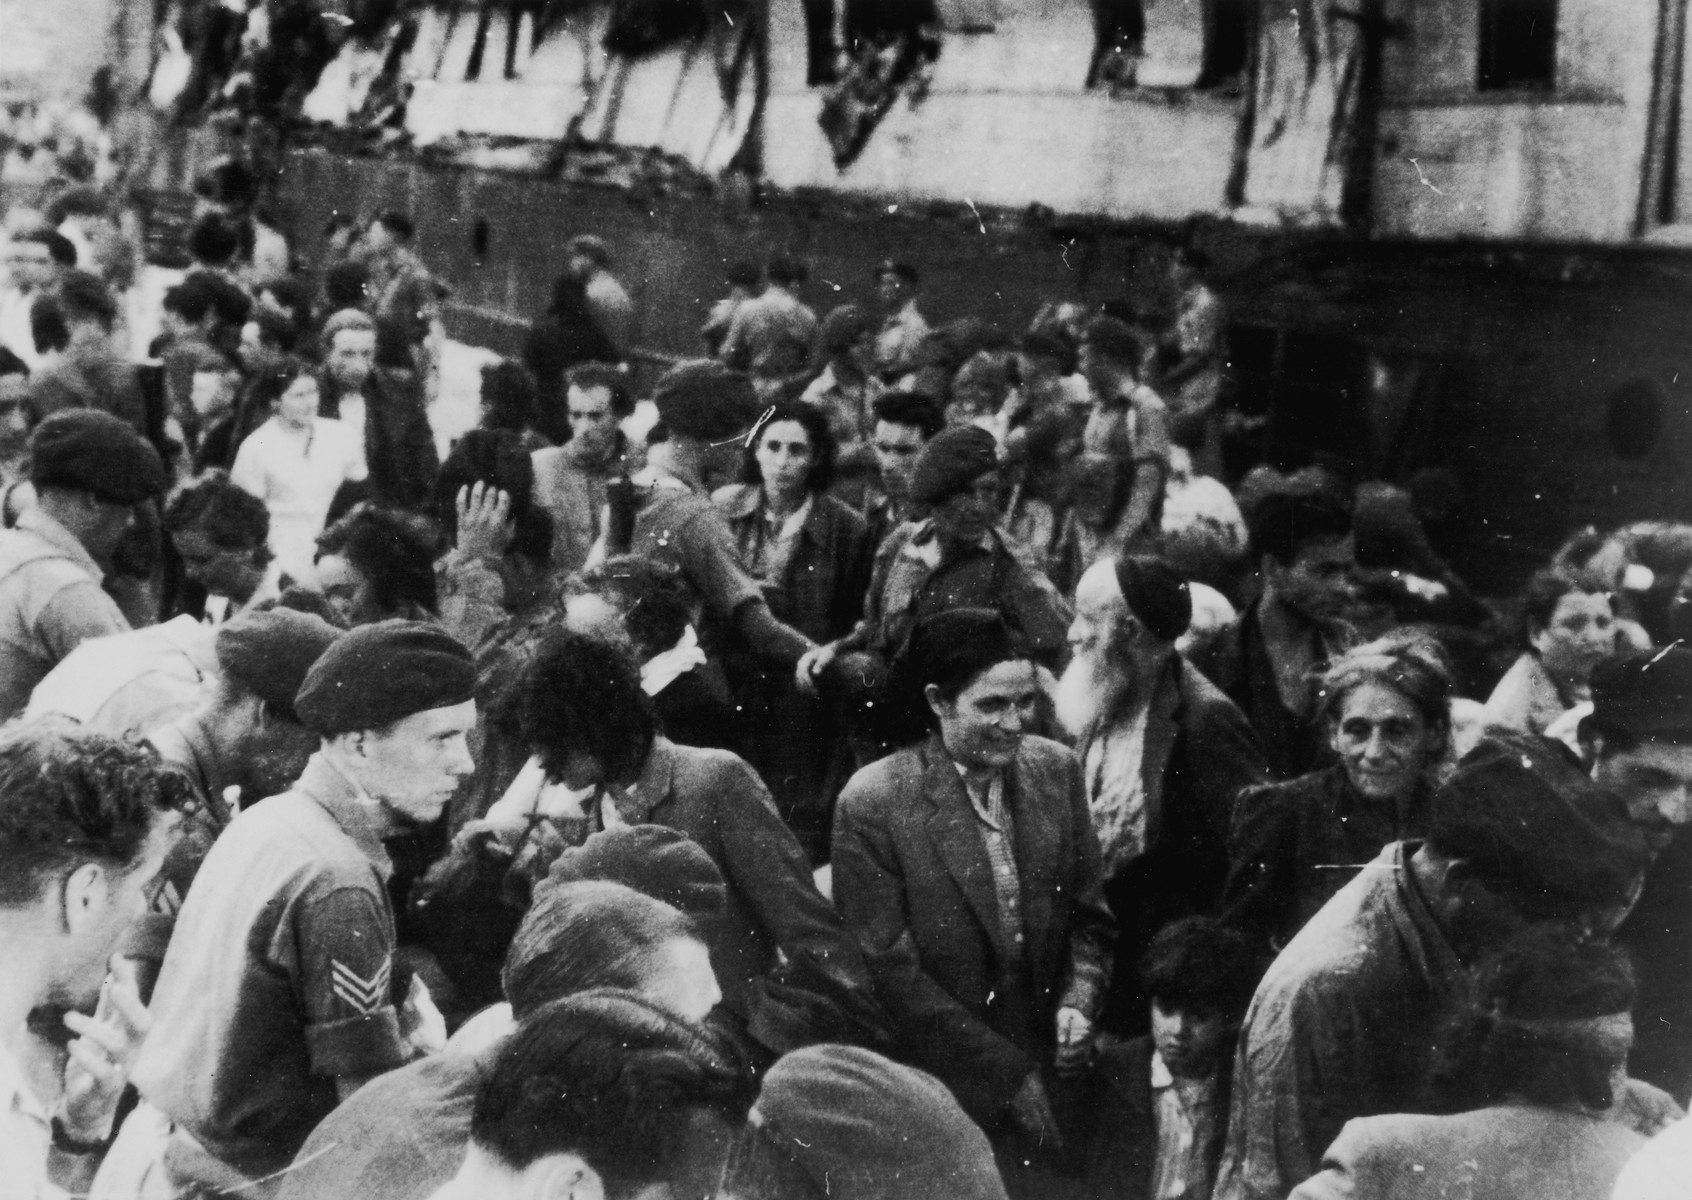 Passengers from the illegal immigrant ship, Exodus 1947, are guided by British soldiers into line to have their papers checked on the dock in Haifa harbor.